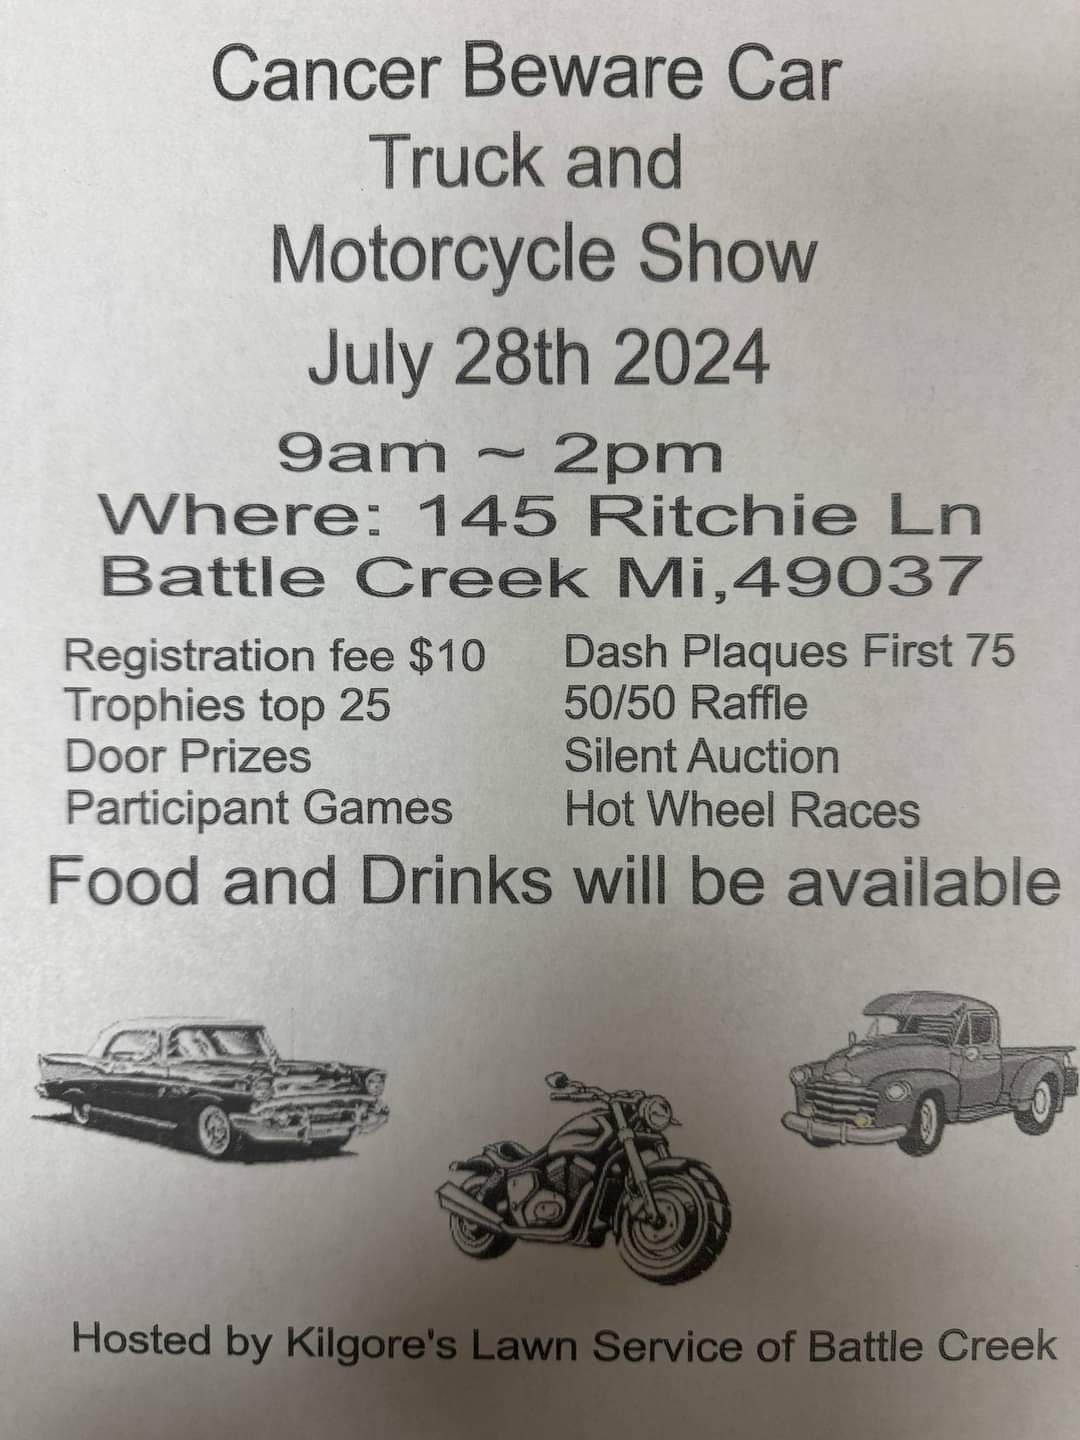 Great Car Show for a Great Cause